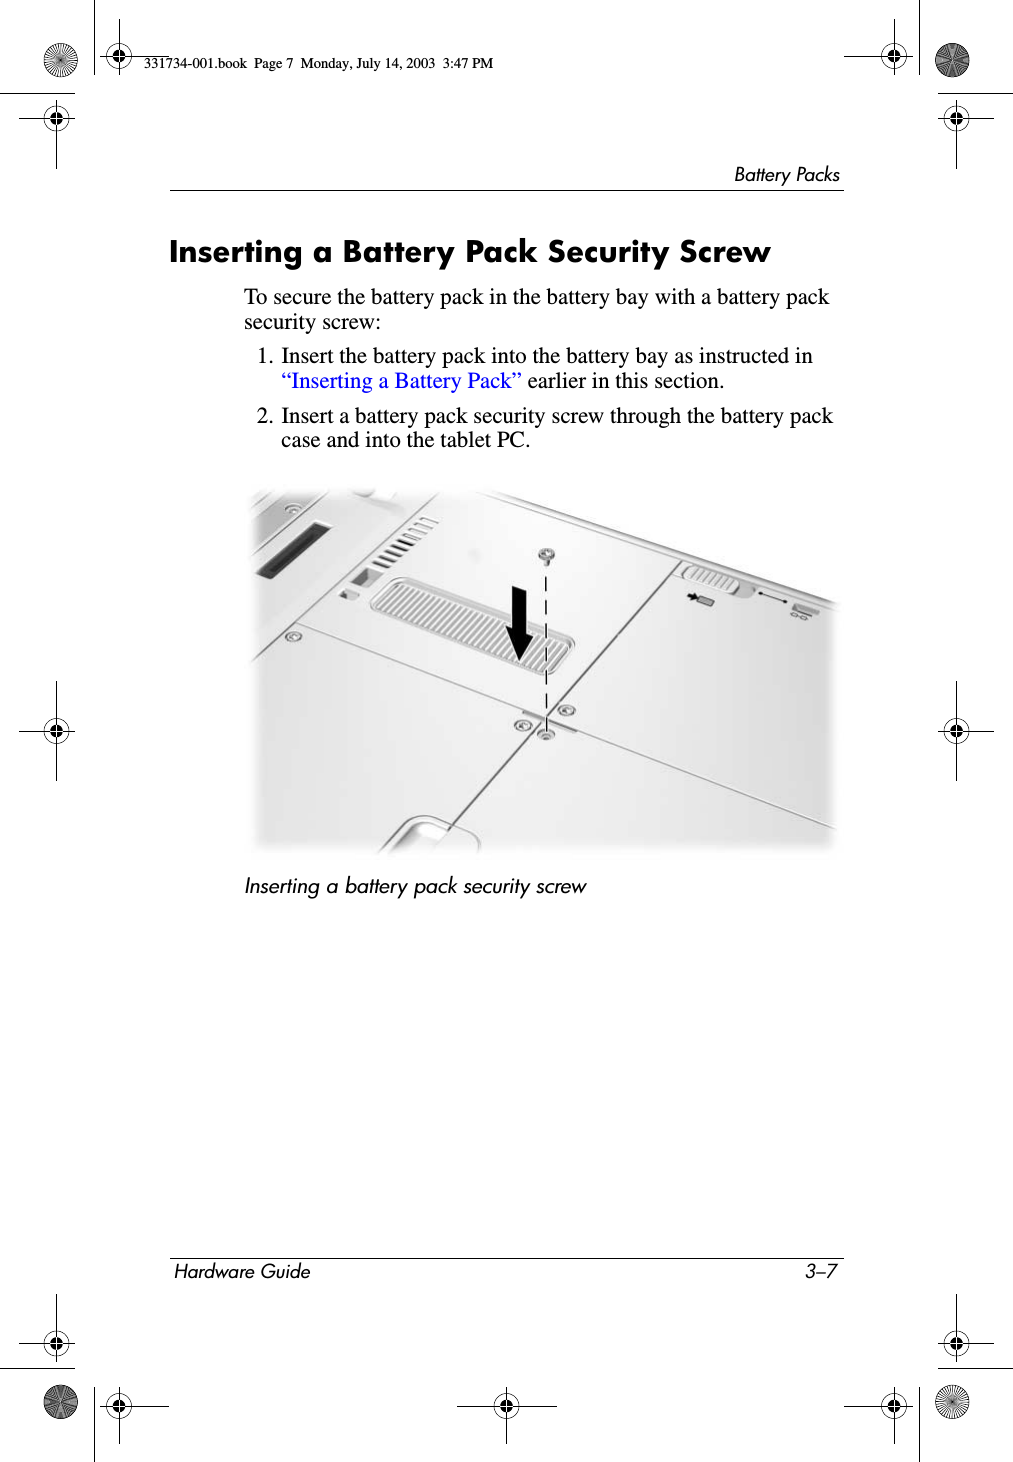 Battery PacksHardware Guide 3–7Inserting a Battery Pack Security ScrewTo secure the battery pack in the battery bay with a battery pack security screw:1. Insert the battery pack into the battery bay as instructed in “Inserting a Battery Pack” earlier in this section.2. Insert a battery pack security screw through the battery pack case and into the tablet PC.Inserting a battery pack security screw331734-001.book  Page 7  Monday, July 14, 2003  3:47 PM